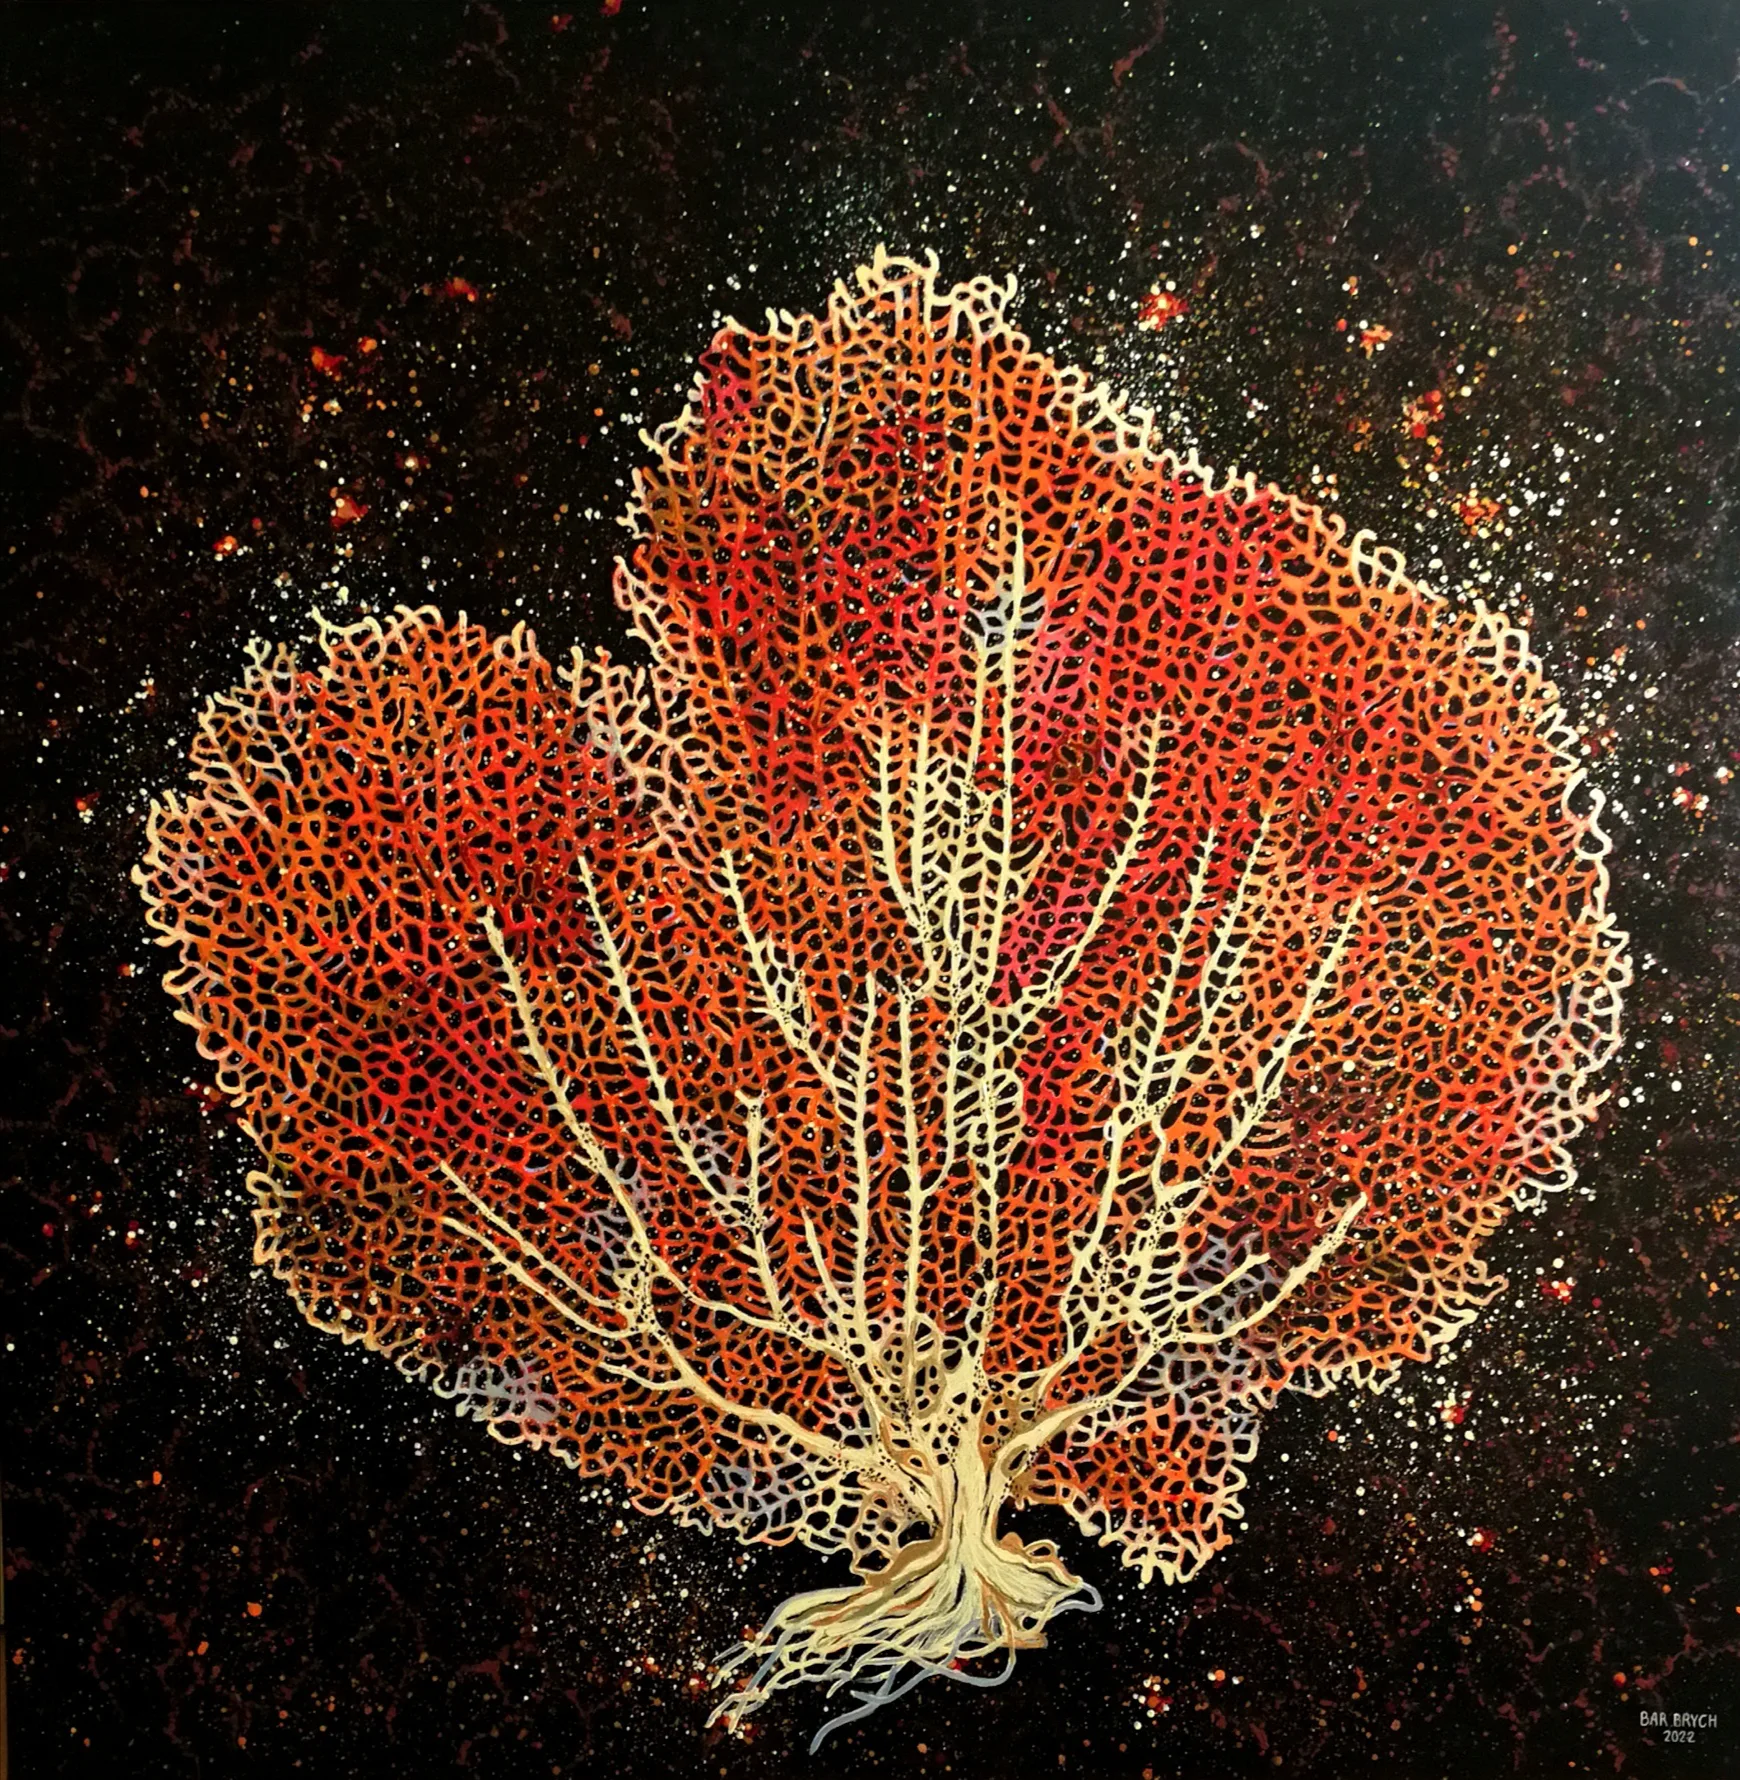 A painting called the Black Lagoon, depicting a coral, size 100x100 cm, made in 2022 using the acrylic technique